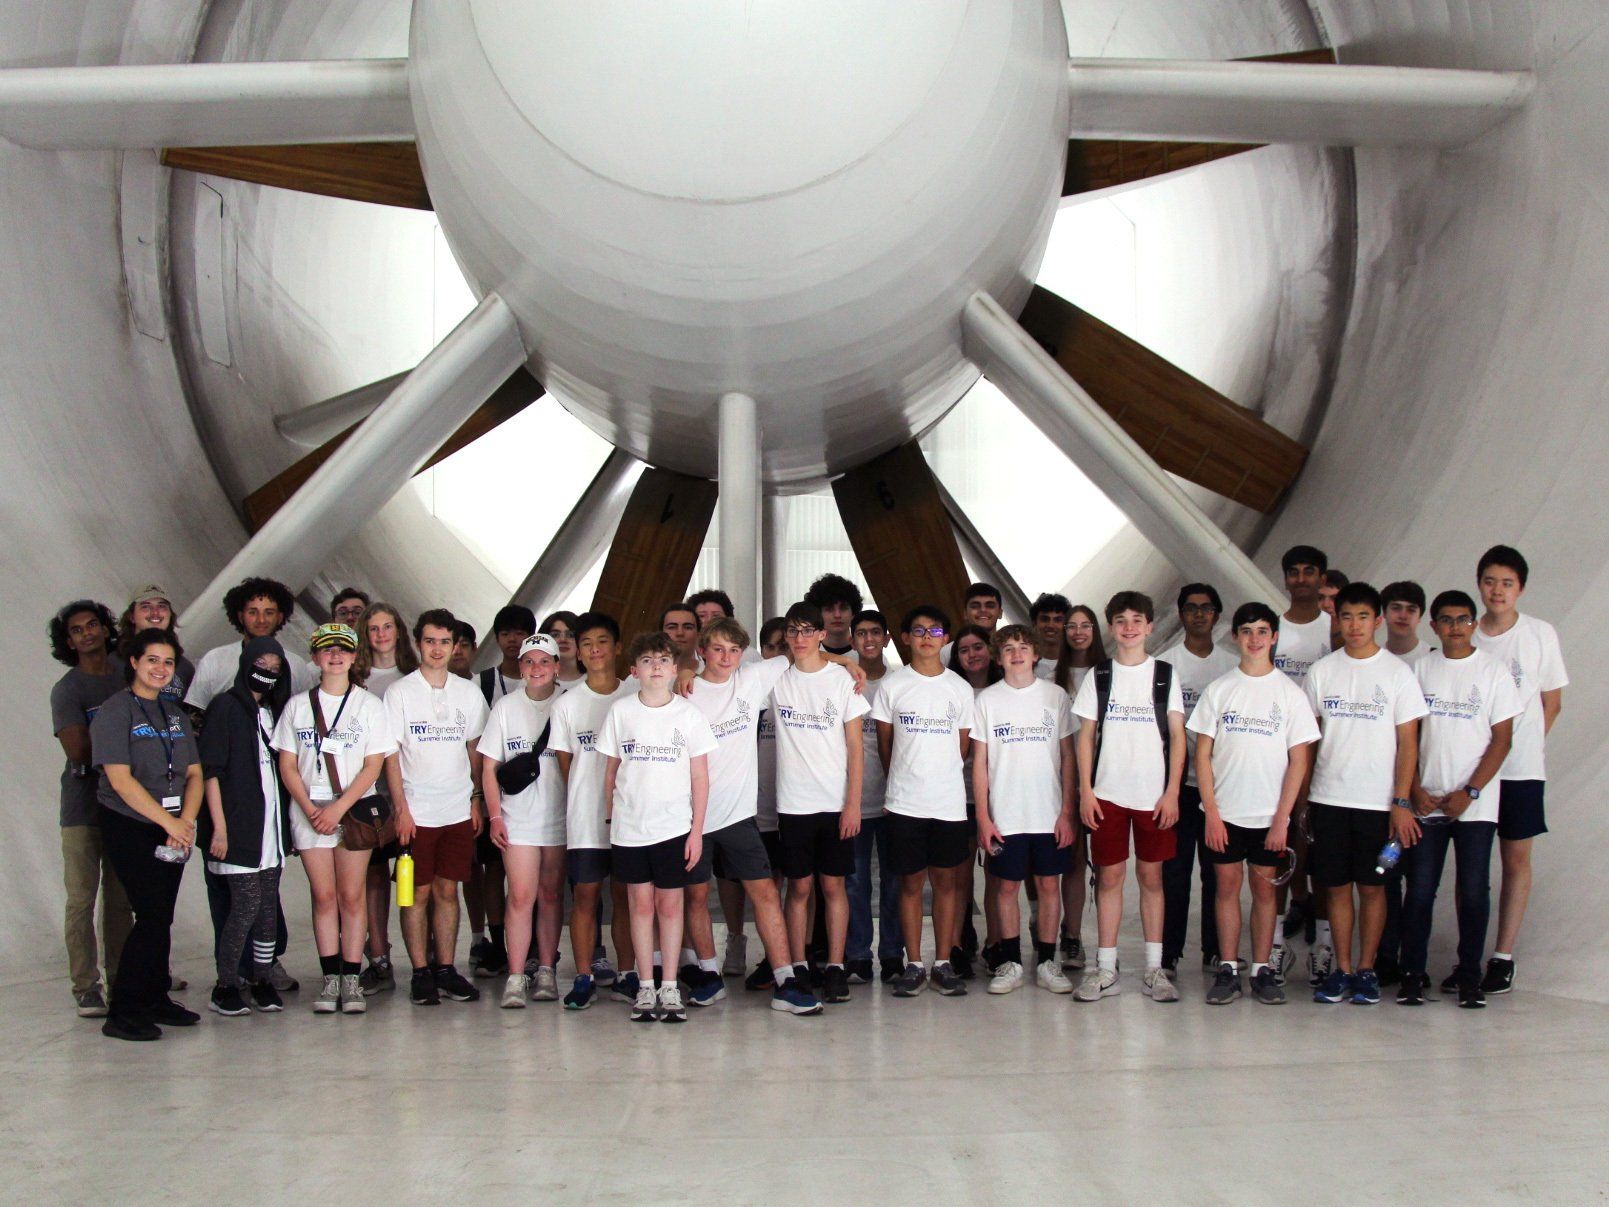 group of teenagers posing for a group photo in white t-shirts in front of a jet engine propeller